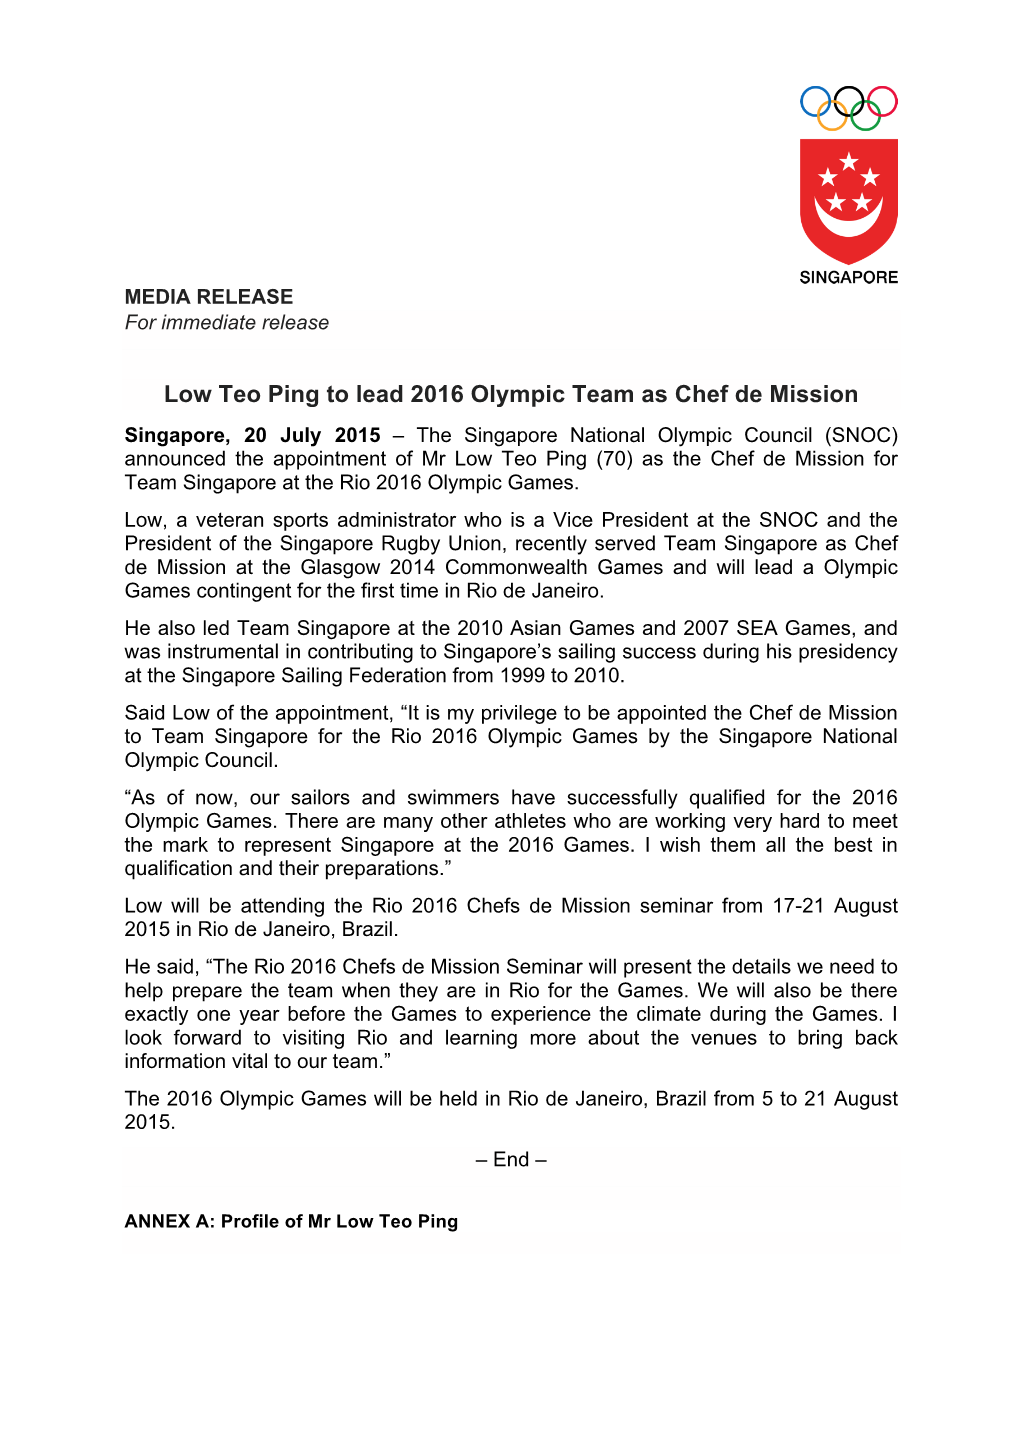 Media Release Low Teo Ping to Lead Rio 2016 Team As CDM Final